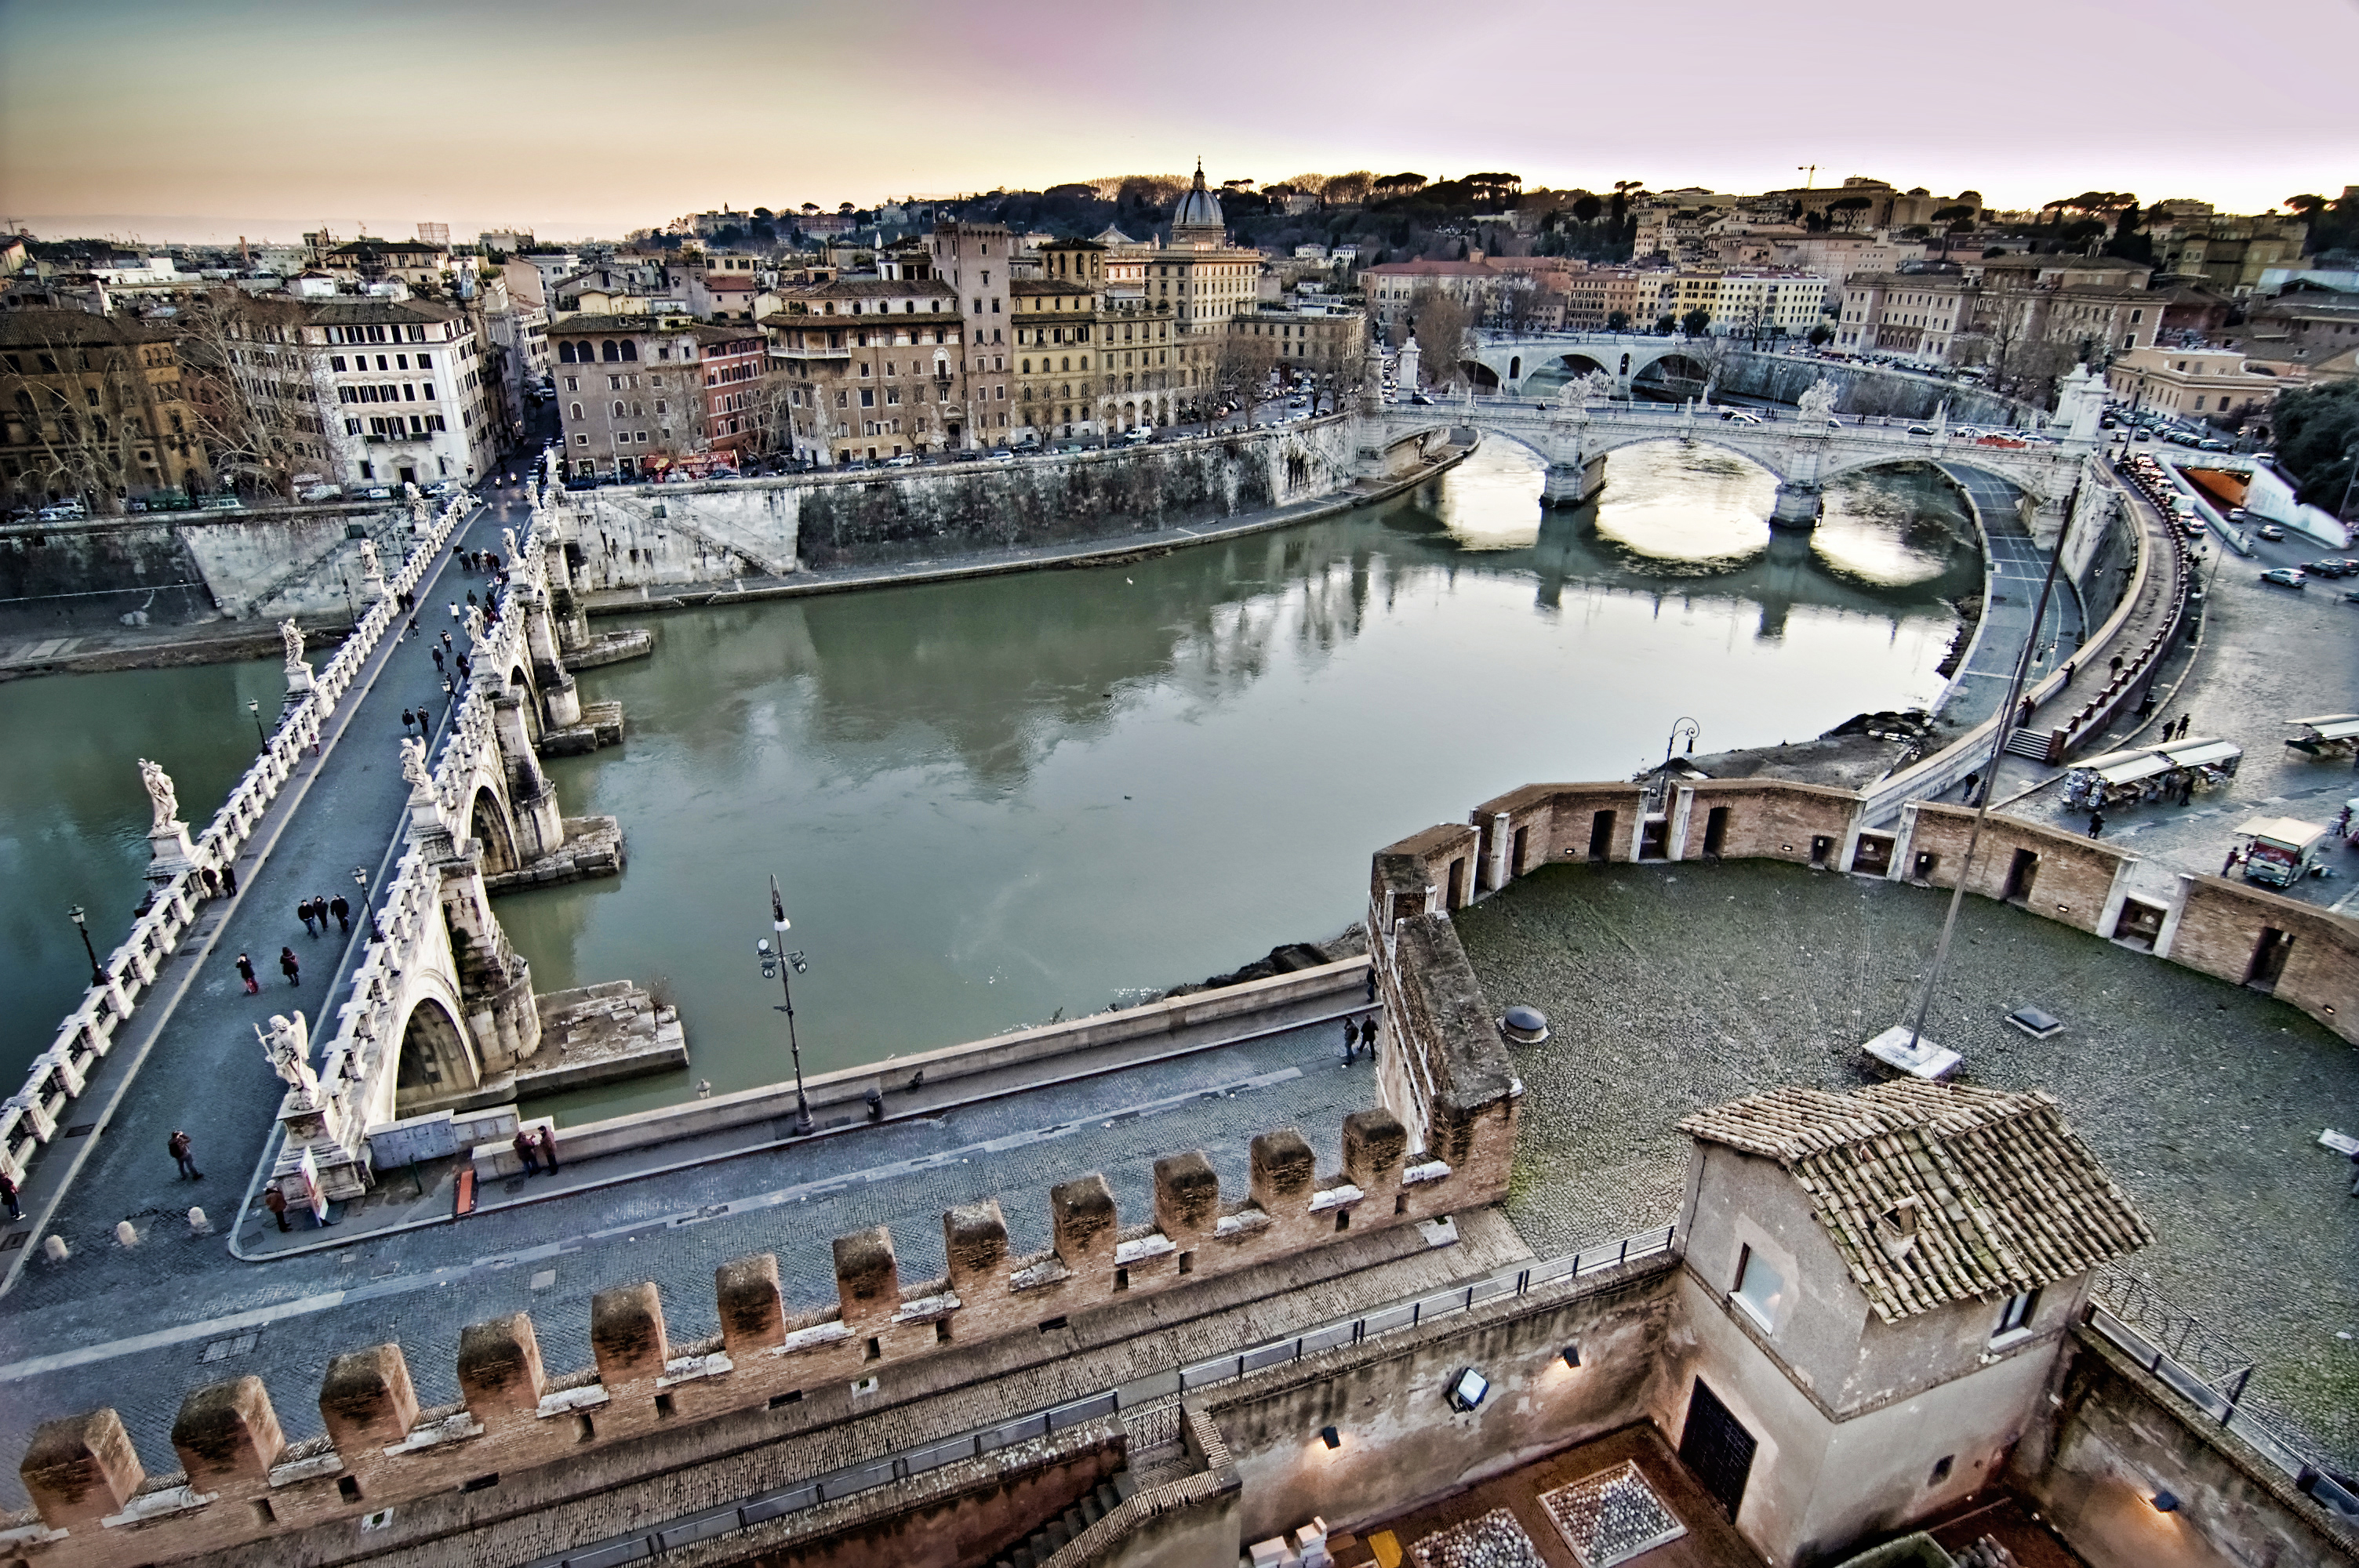 Tiber_from_Castel_Sant_Angelo_Rome_Italy